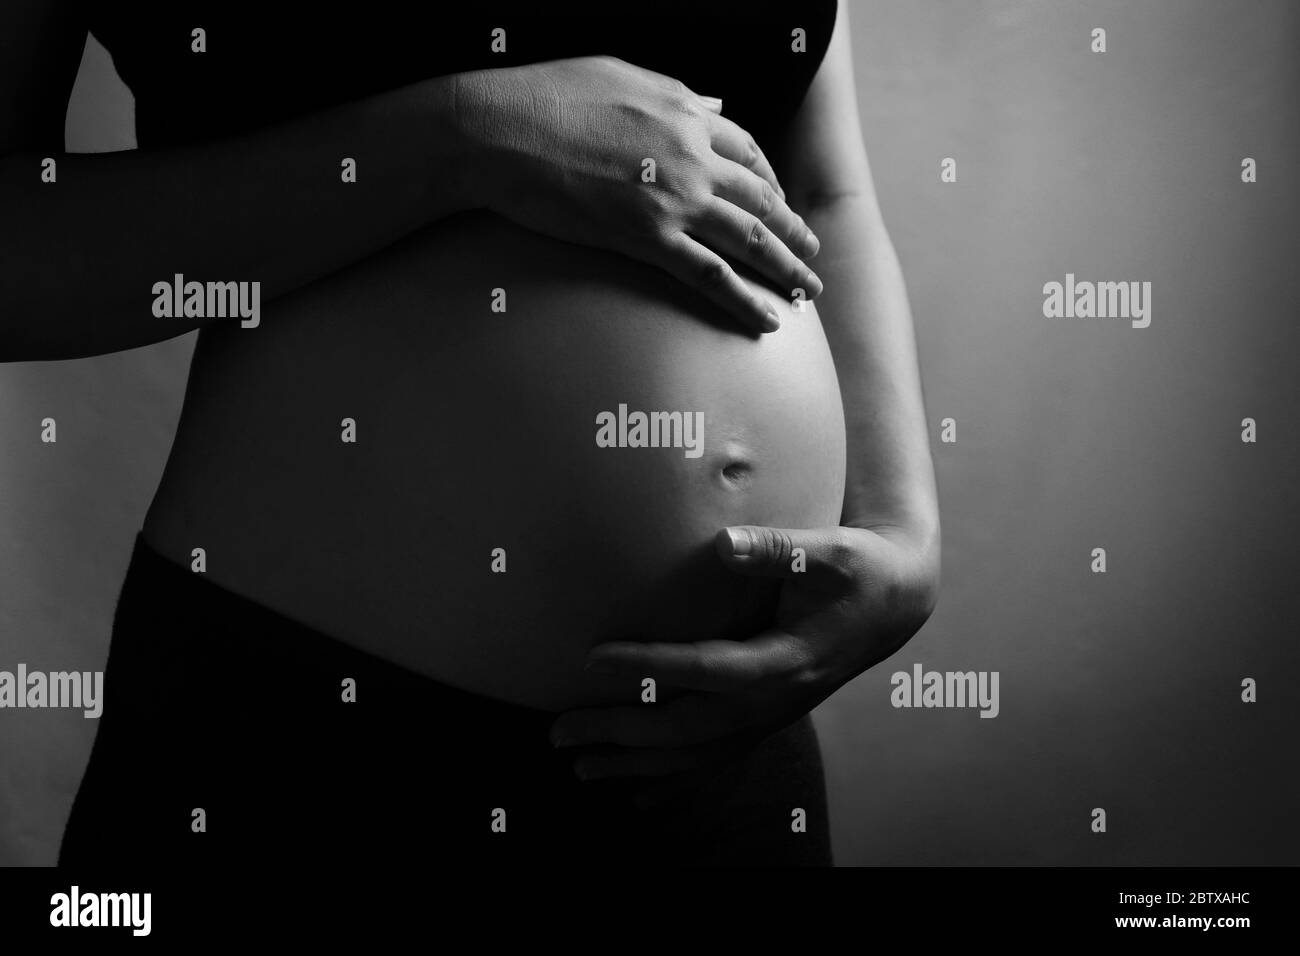 Pregnant woman with black & white color Stock Photo